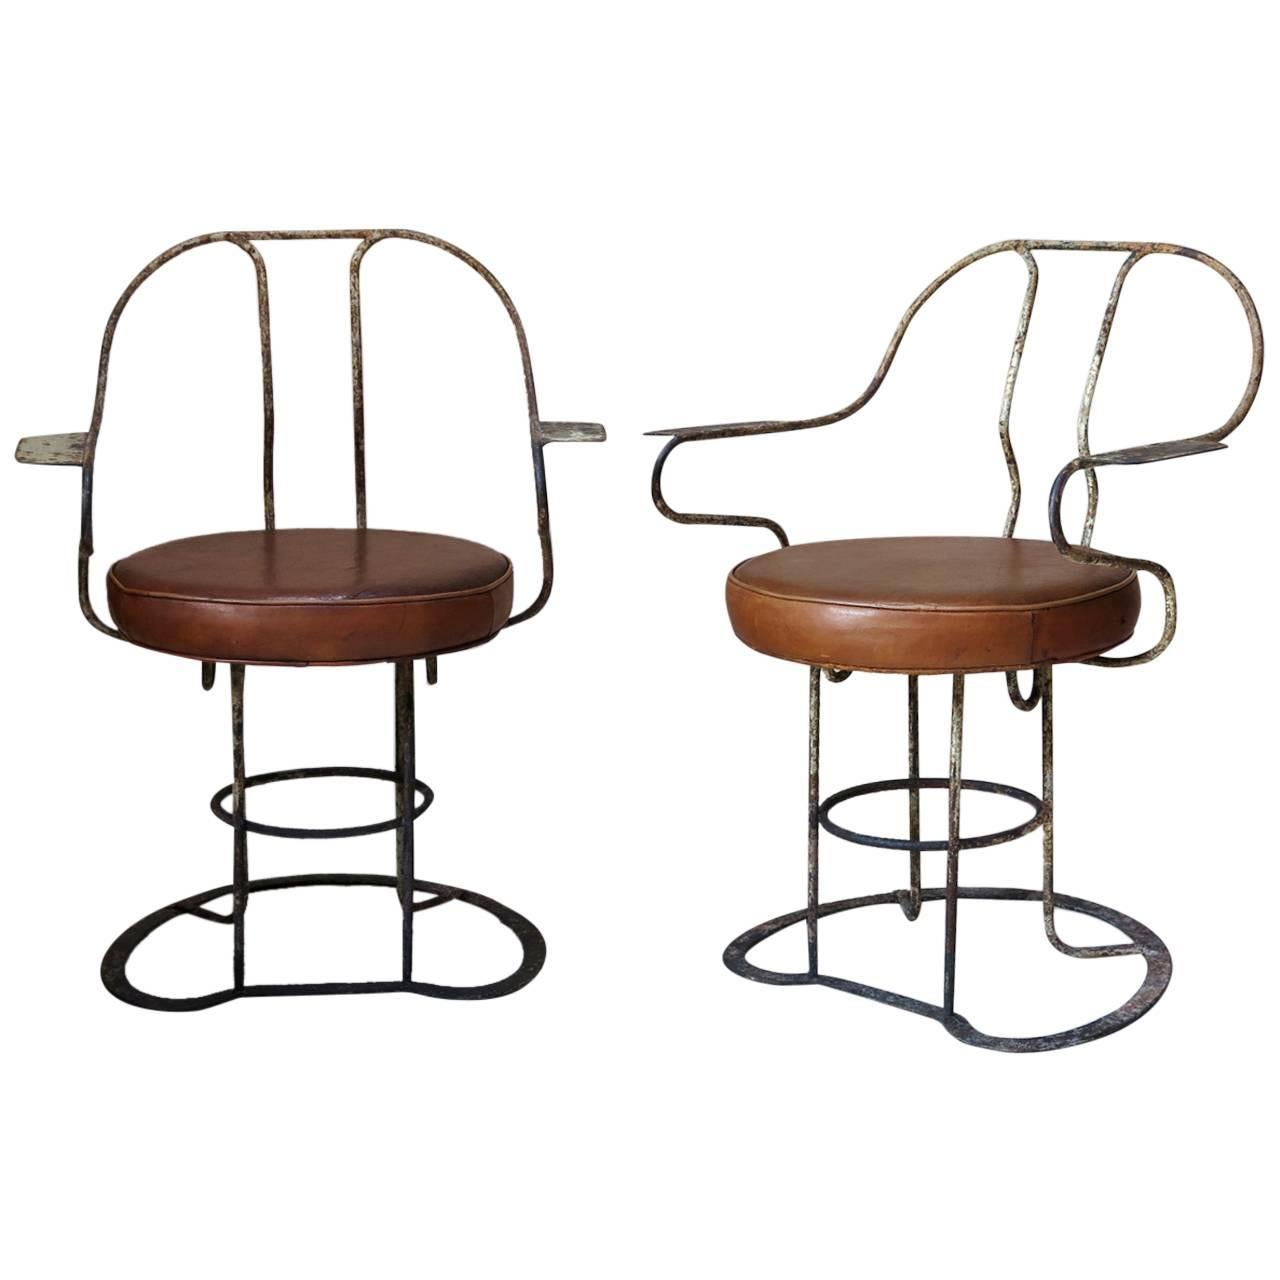 Unusual Pair of Iron and Leather Armchairs, France, circa 1930s